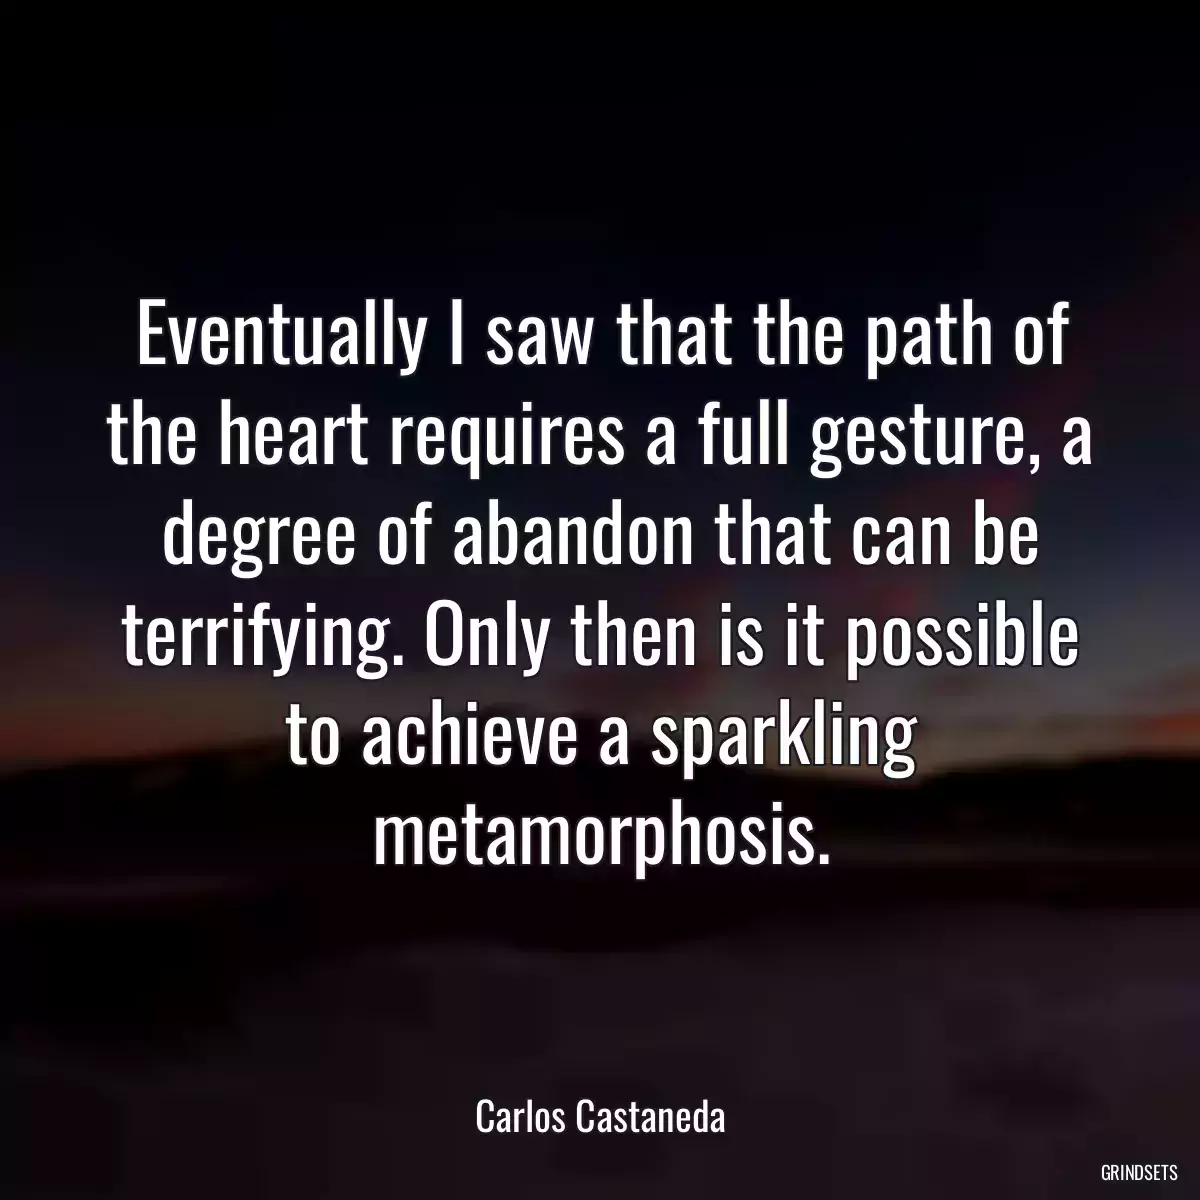 Eventually I saw that the path of the heart requires a full gesture, a degree of abandon that can be terrifying. Only then is it possible to achieve a sparkling metamorphosis.